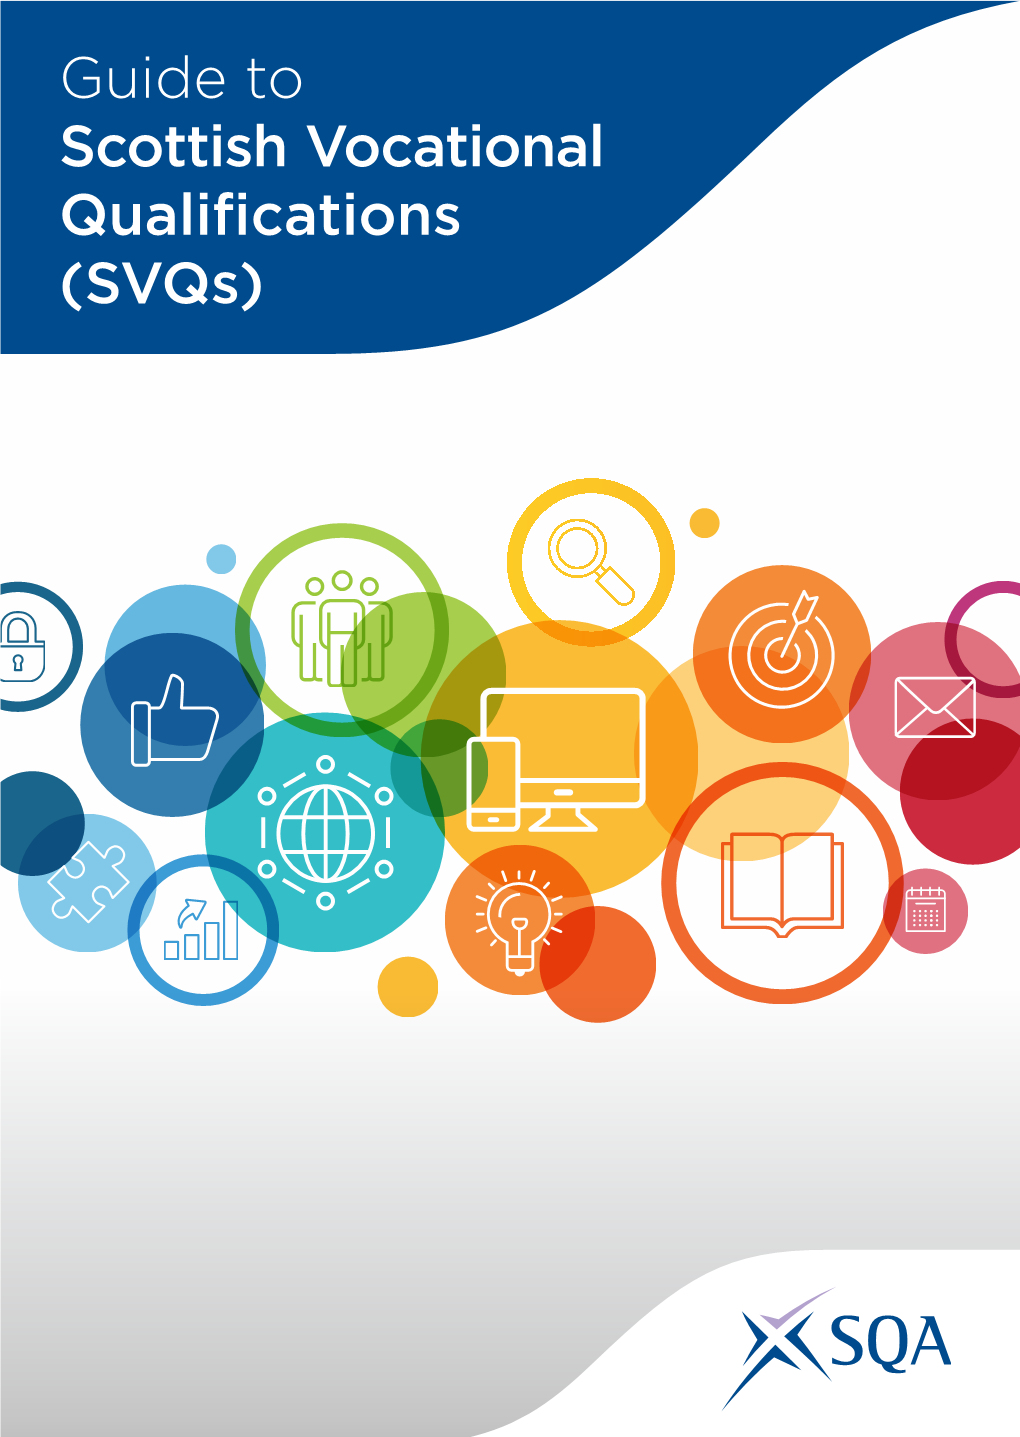 Guide to Scottish Vocational Qualifications (Svqs) Scottish Vocational Qualifications (Svqs)